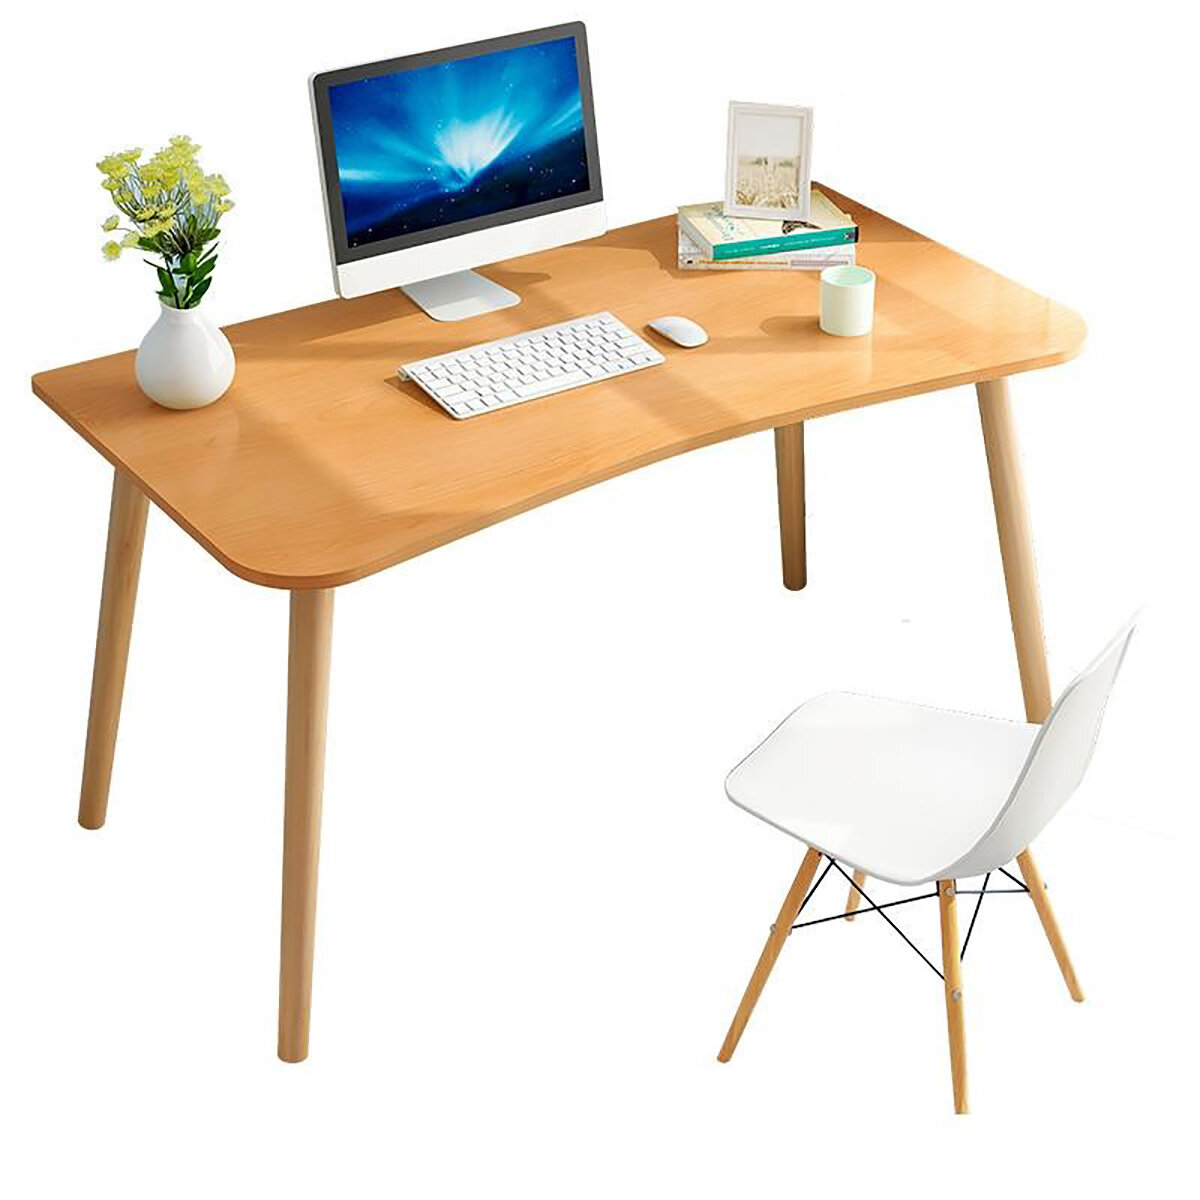 

100x50x75cm Wooden Desk Standing Laptop Mesa Computer Study Writting Table for Home Furniture